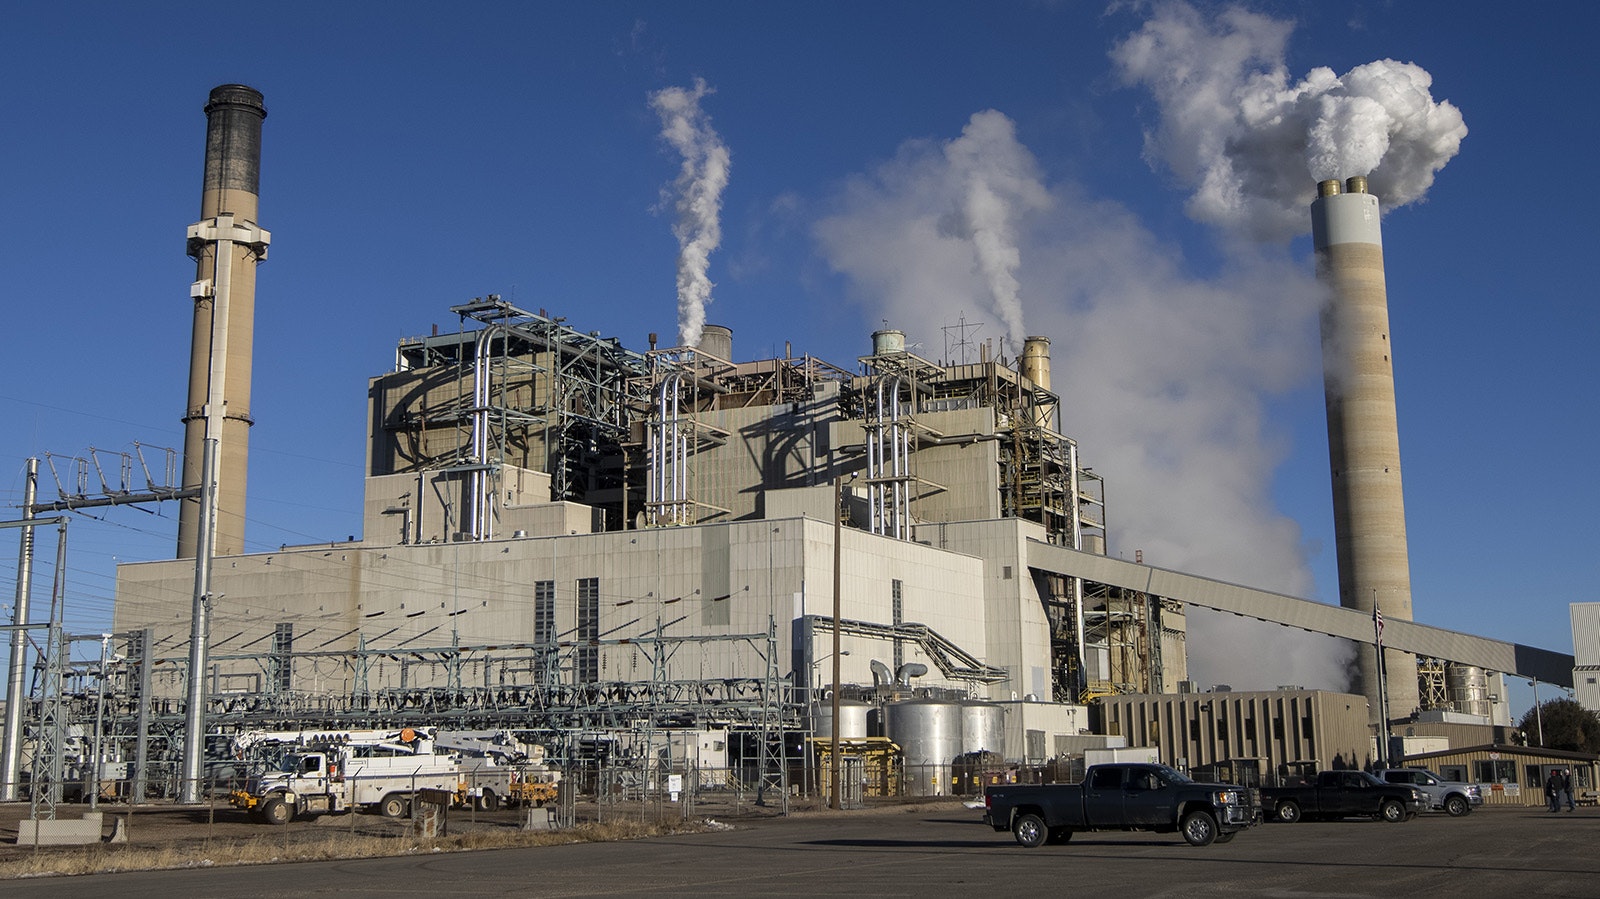 A Natrium nuclear power plant by TerraPower will replace the Naughton power plant near Kemmerer when it's decommissioned.